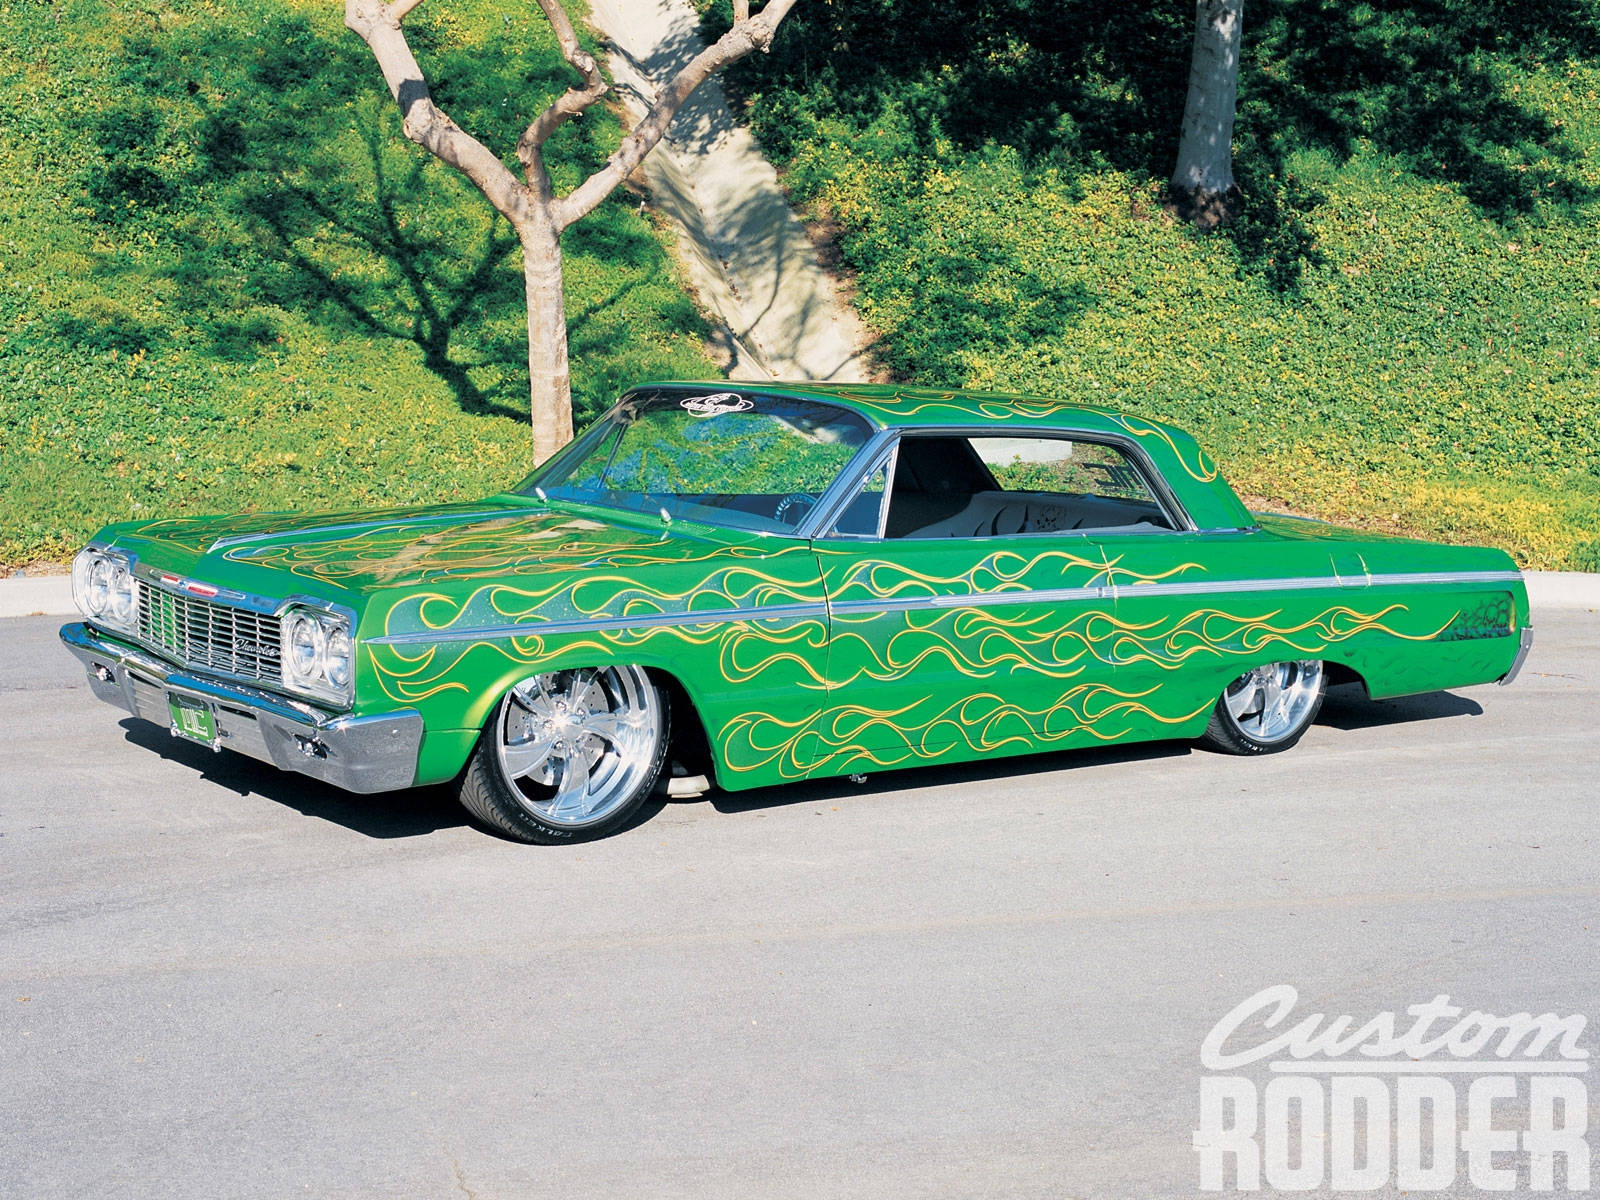 Lowrider Green Impala With Fiery Decals